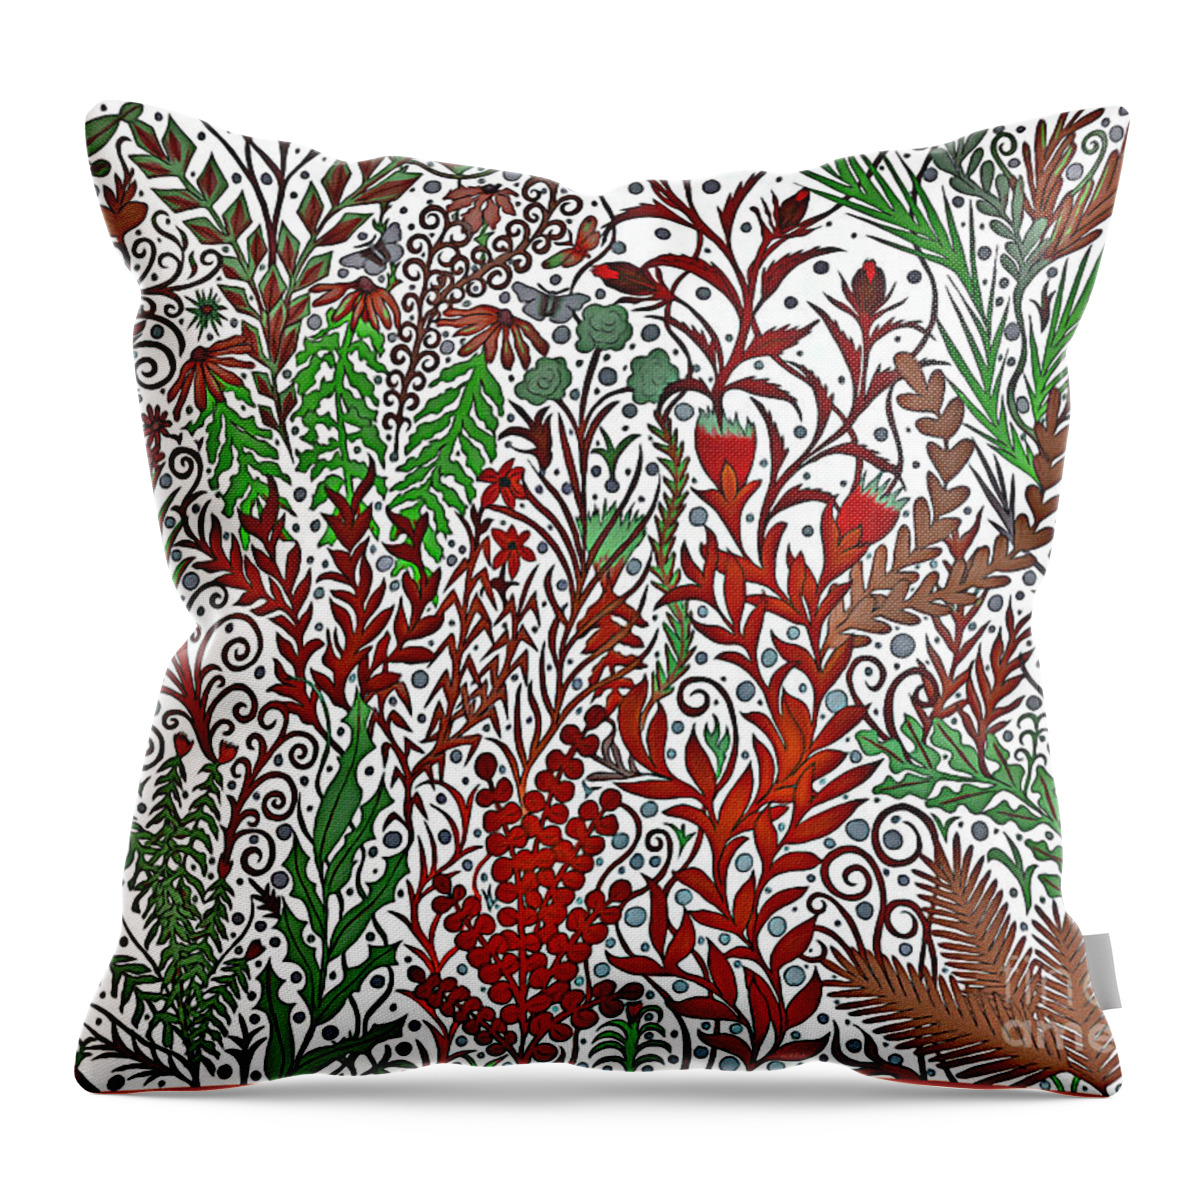 Lise Winne Throw Pillow featuring the tapestry - textile A Garden in the Midst of a Changing Season by Lise Winne